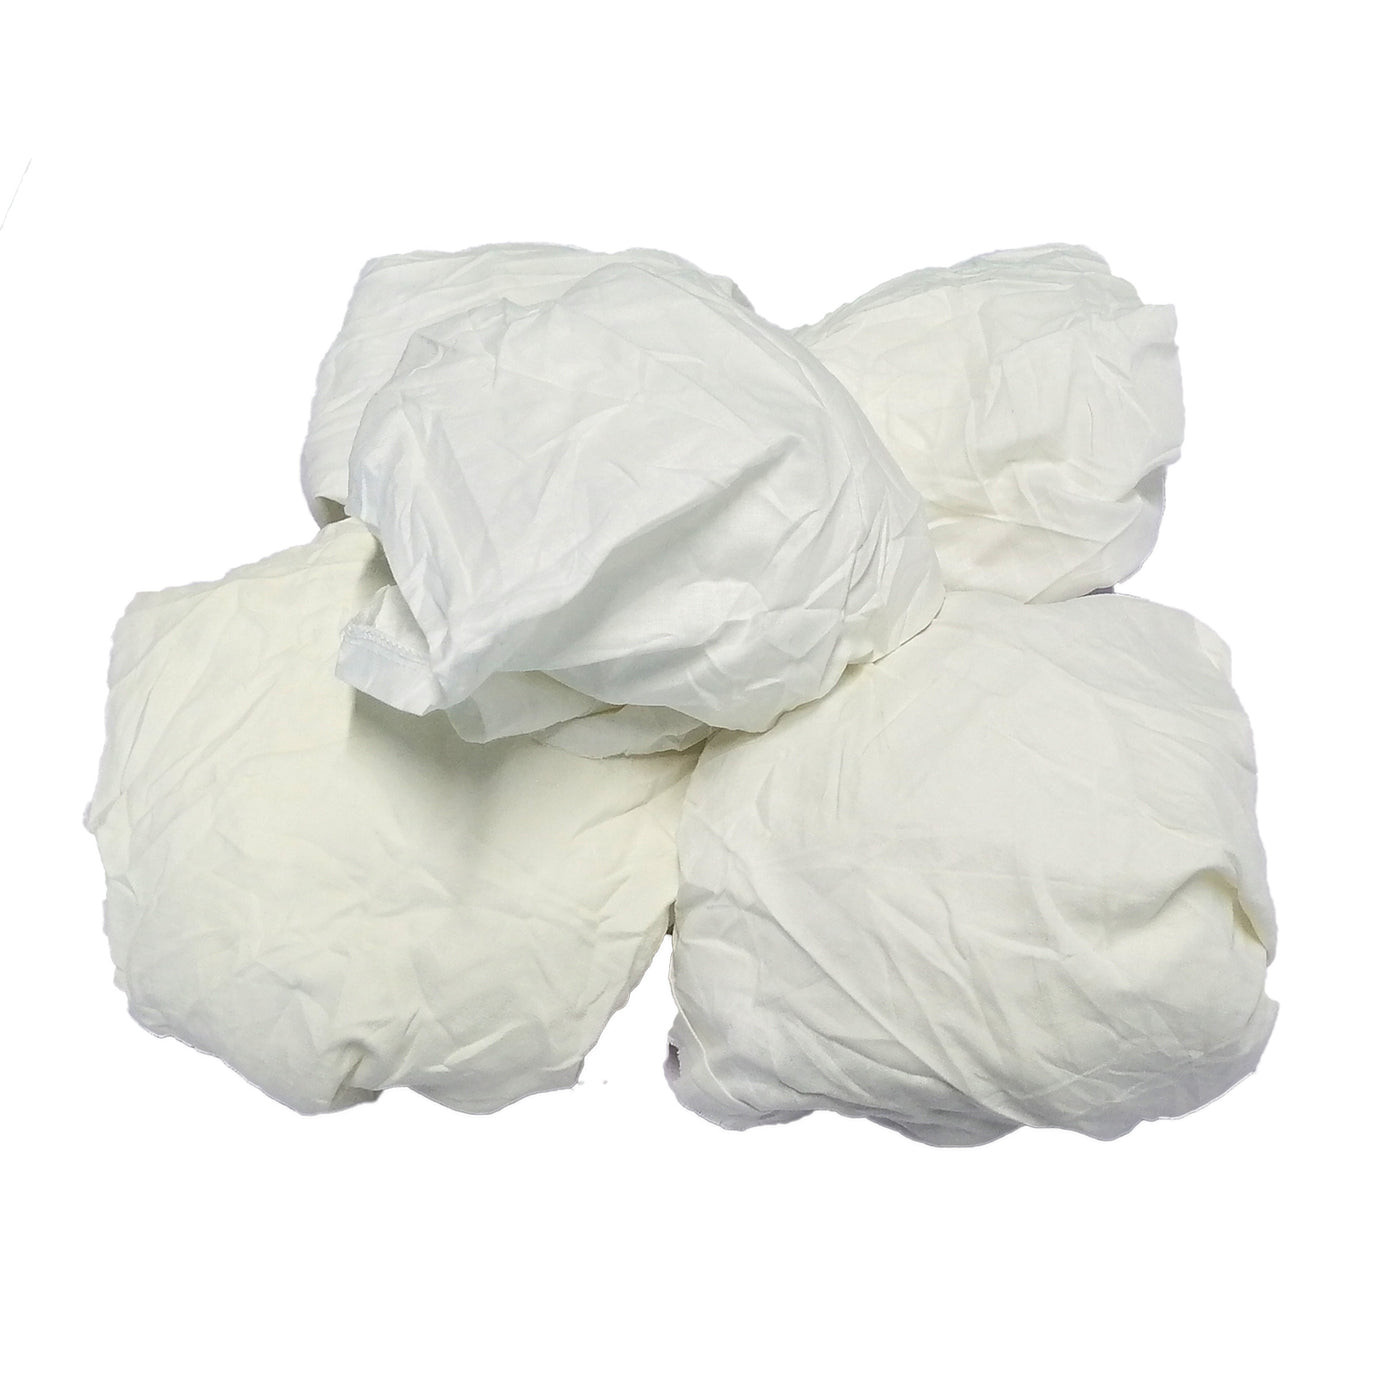  A&A Wiping Cloth- Recycled Cut White Sheeting Rags, Strong &  Absorbent Cleaning Rags for All Clean-up Purposes, 10 Pound Box : Health &  Household